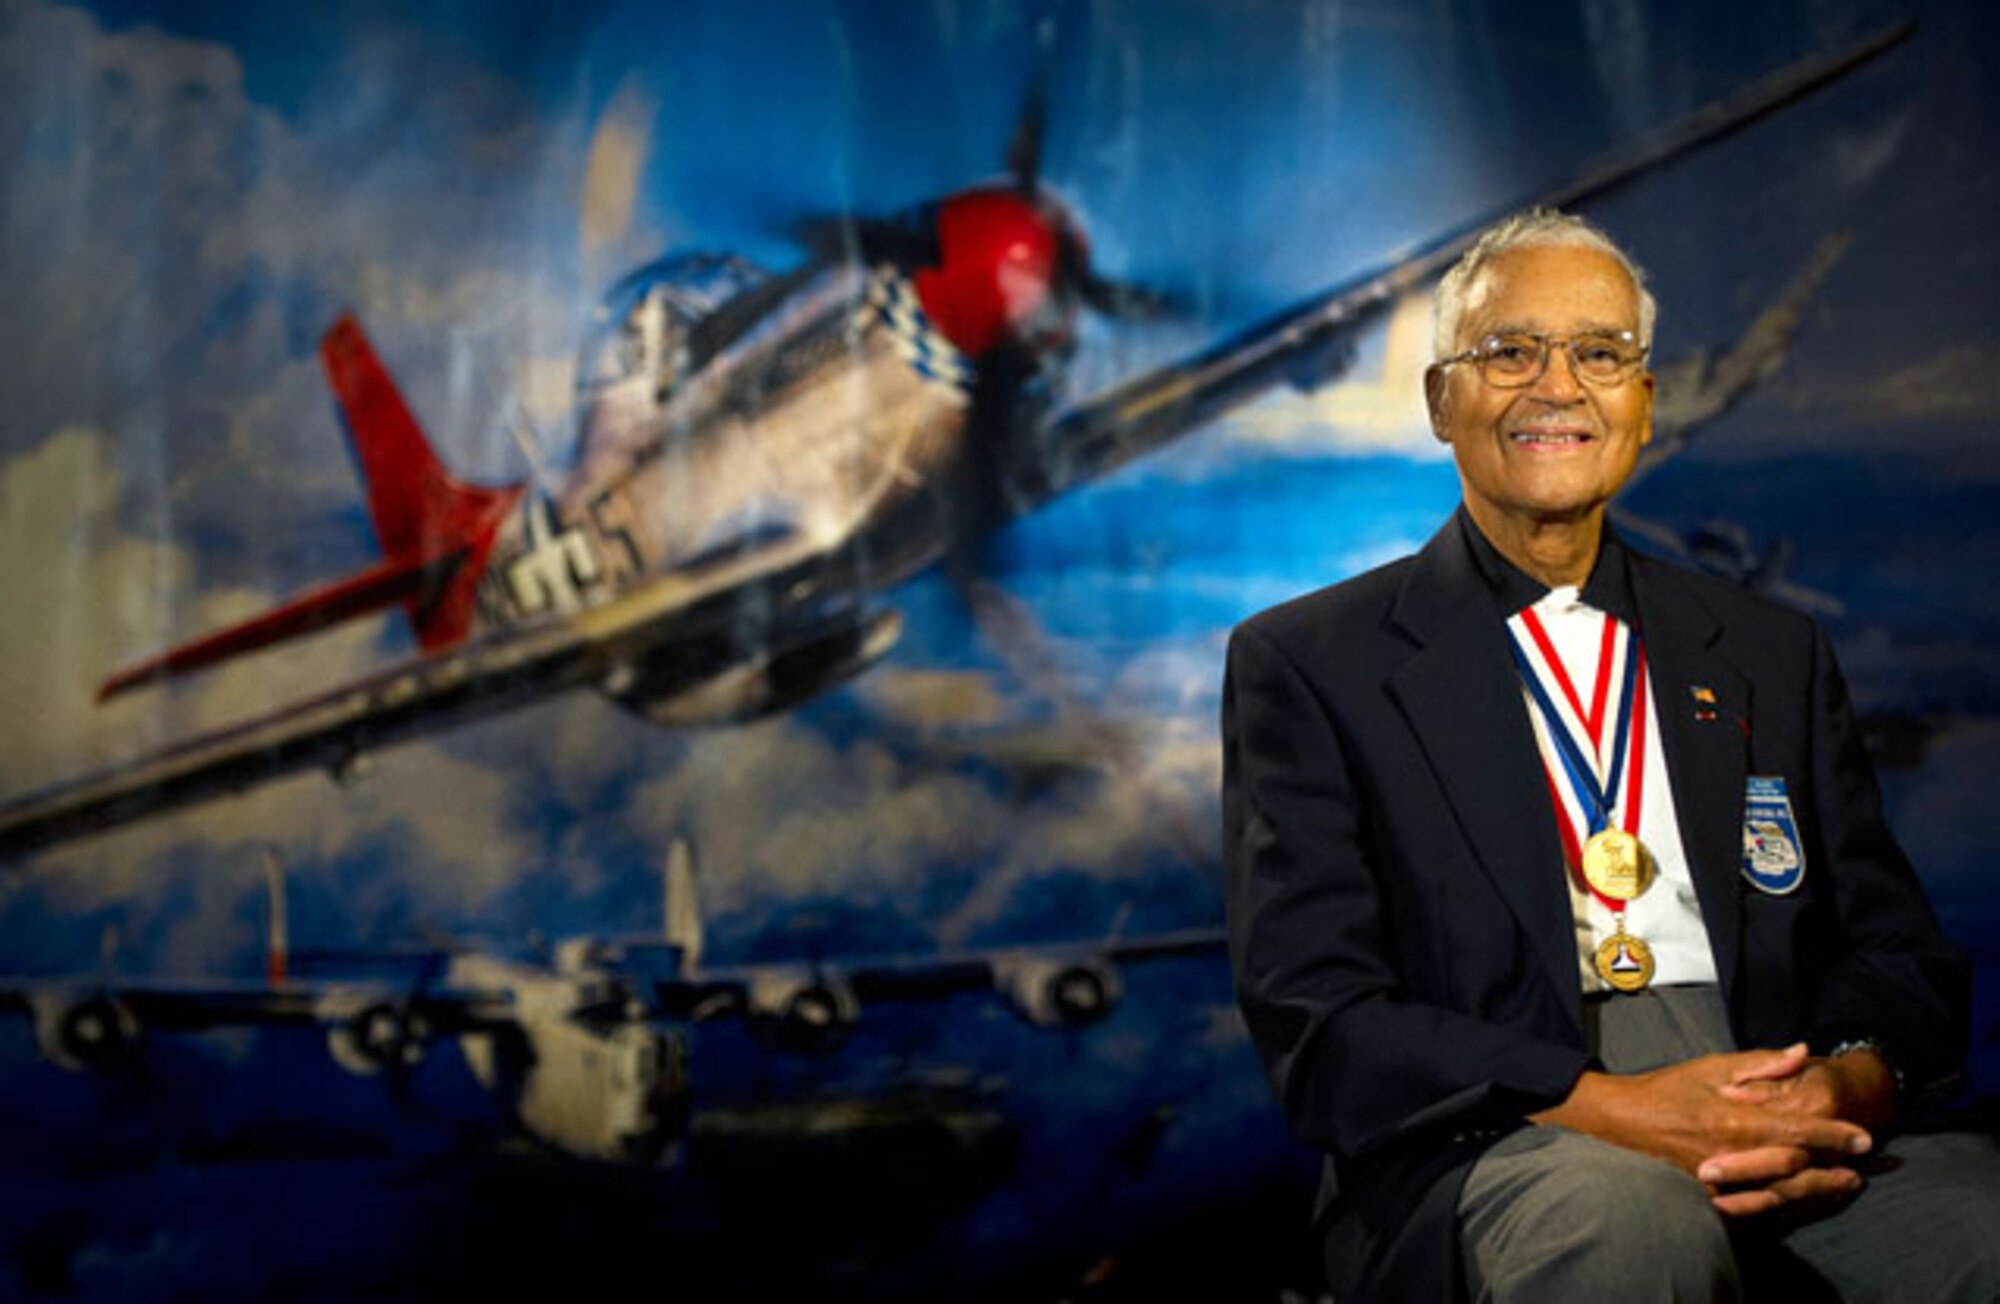 Retired Col. Charles McGee, an original Tuskegee Airman, will serve as the guest speaker during the African American Heritage Month luncheon at the Minuteman Commons Feb. 21. (Photography by Staff Sgt. Vernon Young Jr.)